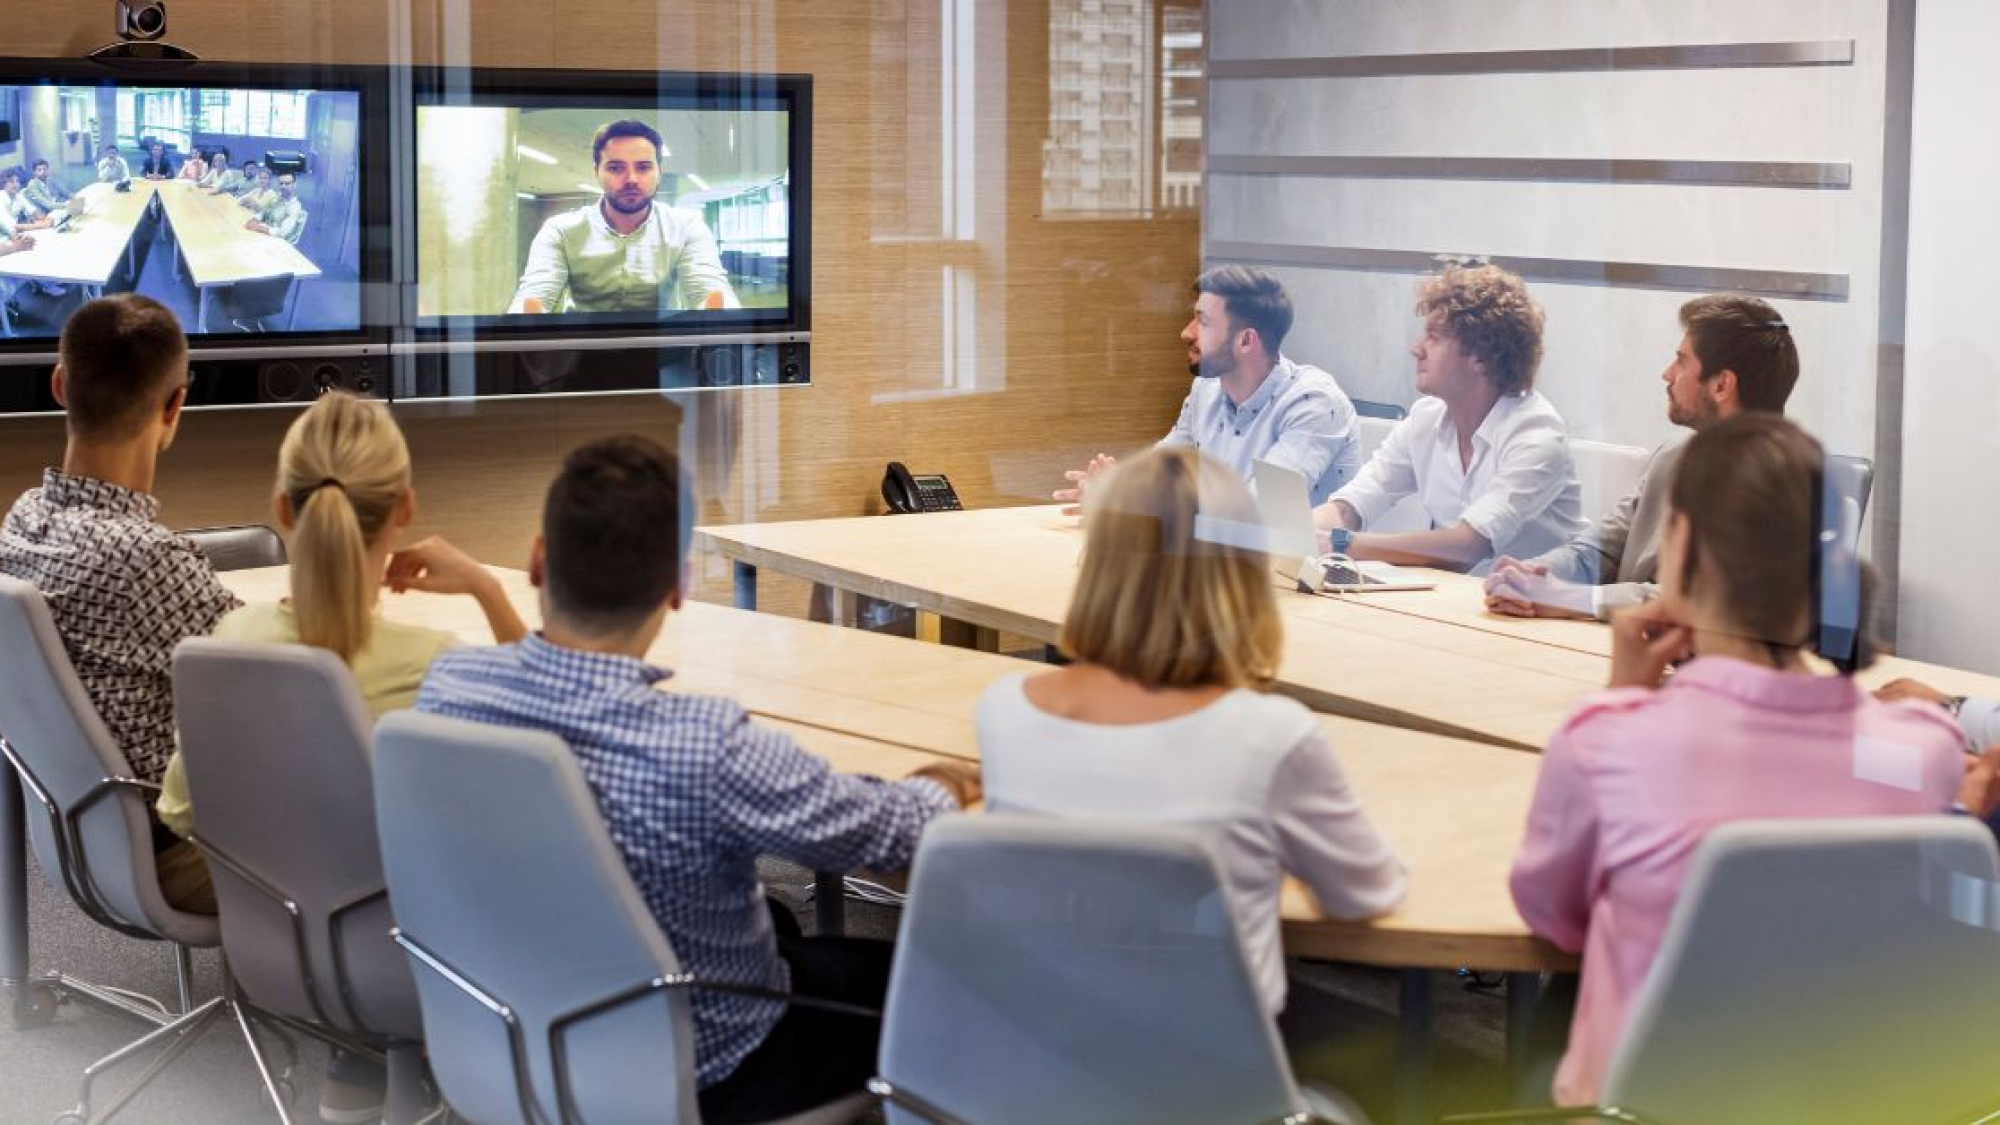 When and Why Should You Modernize Your Business’s AV System?